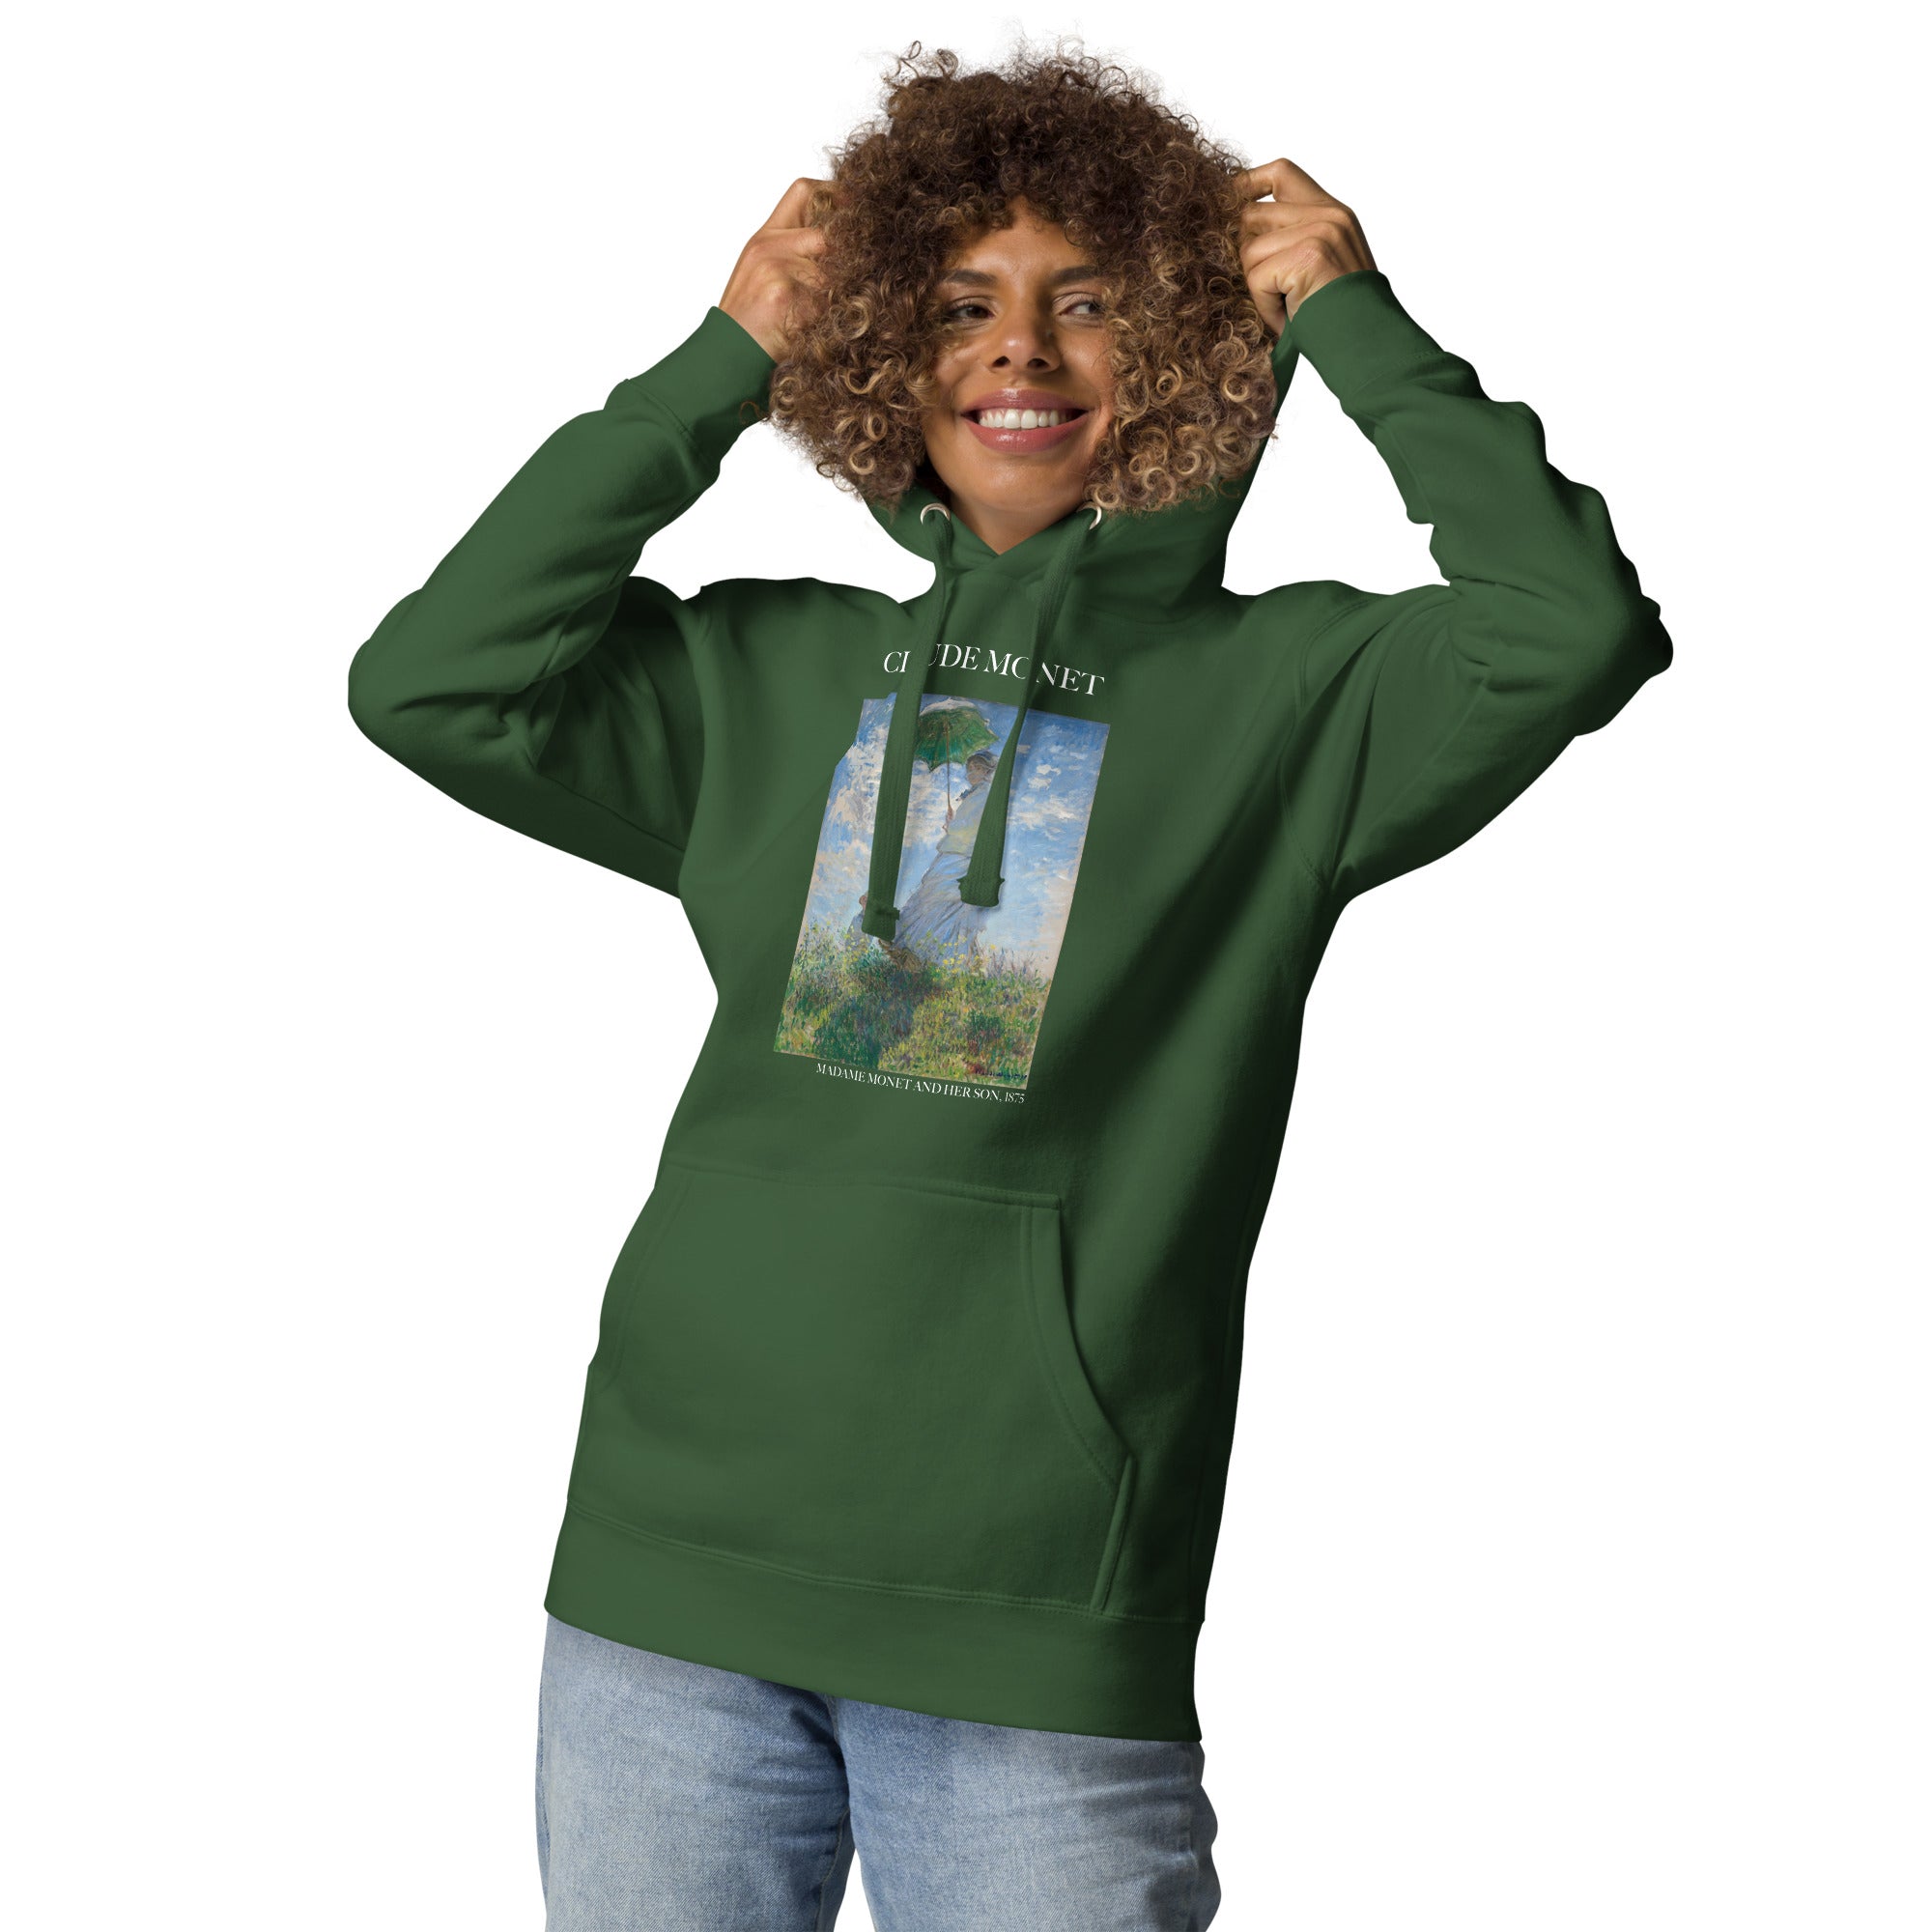 Claude Monet 'Madame Monet and Her Son' Famous Painting Hoodie | Unisex Premium Art Hoodie